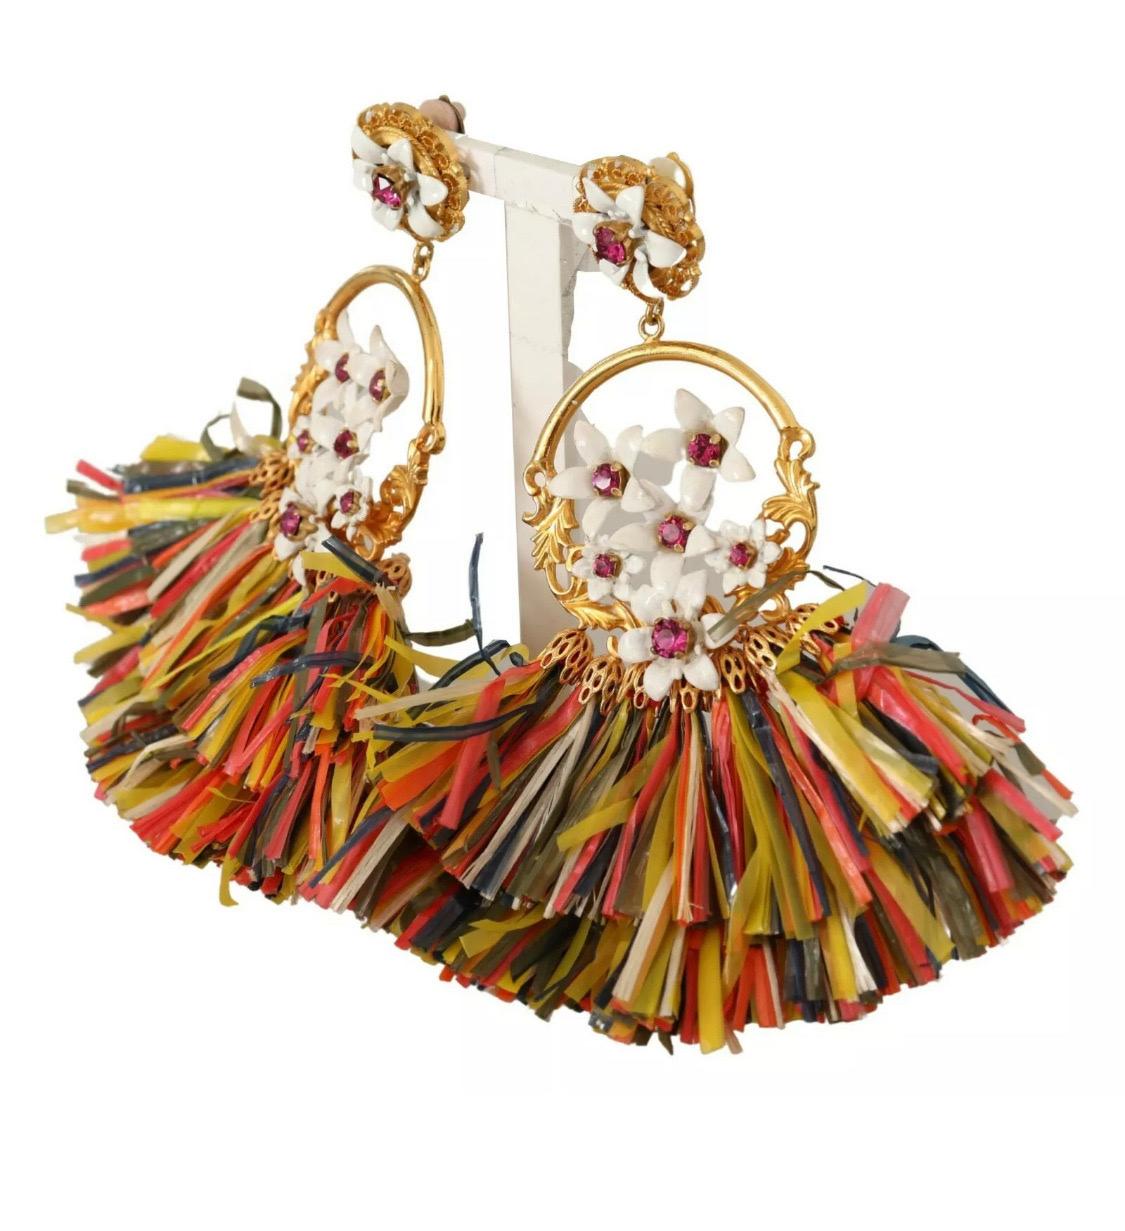 DOLCE & GABBANA

Gorgeous brand new with tags, 100% Authentic Dolce & Gabbana earrings.

Model: Clip-on, dangling
Motive: Raffia floral
Material: 40% Brass, 10% Crystal, 50% Raffia
Color: Gold with multicolor detailing
Logo details
Made in